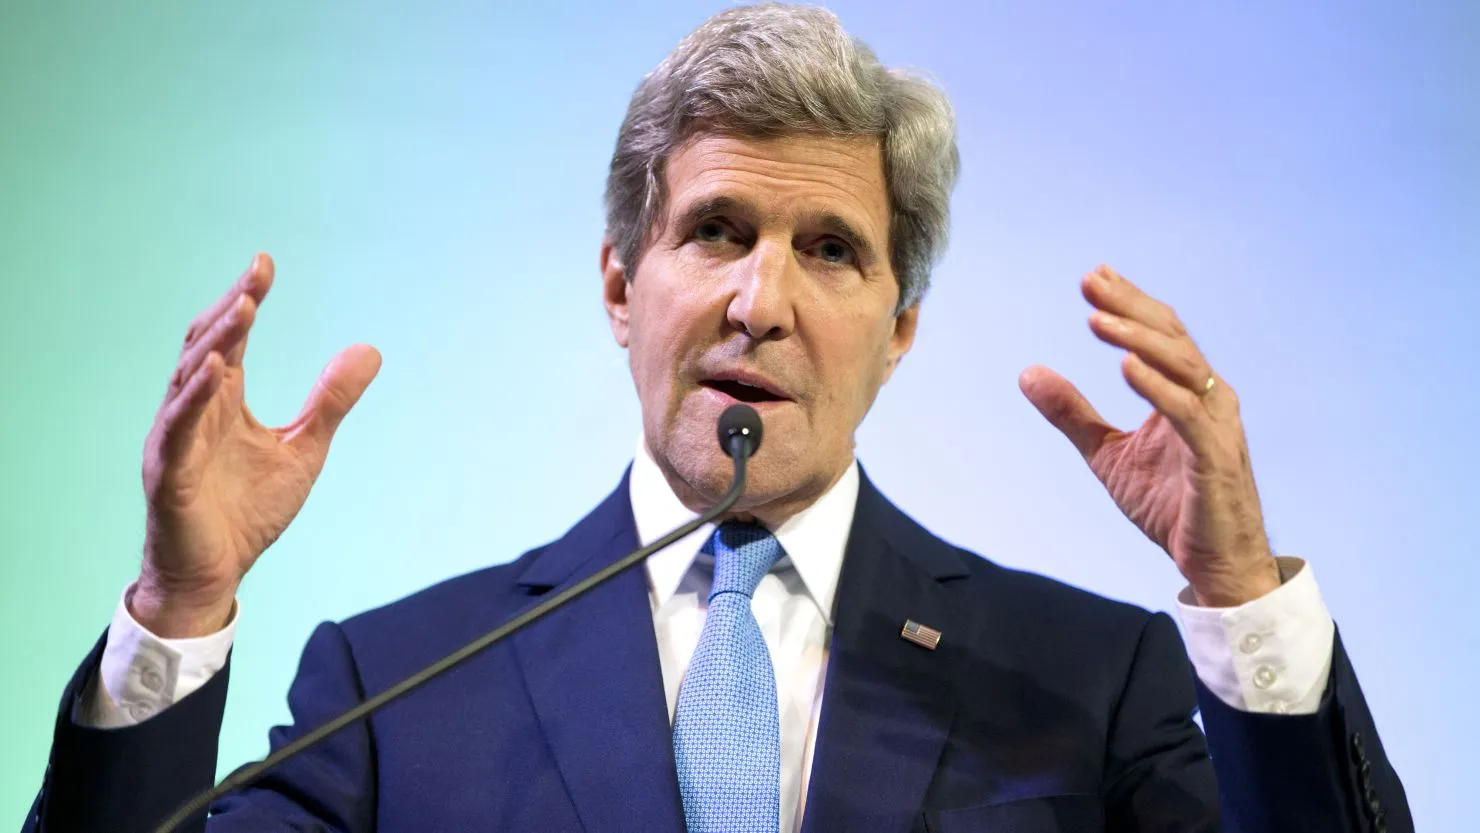 John Kerry: People Would ‘Feel Better’ About Ukraine War If Russia ‘Cut Its Emissions’